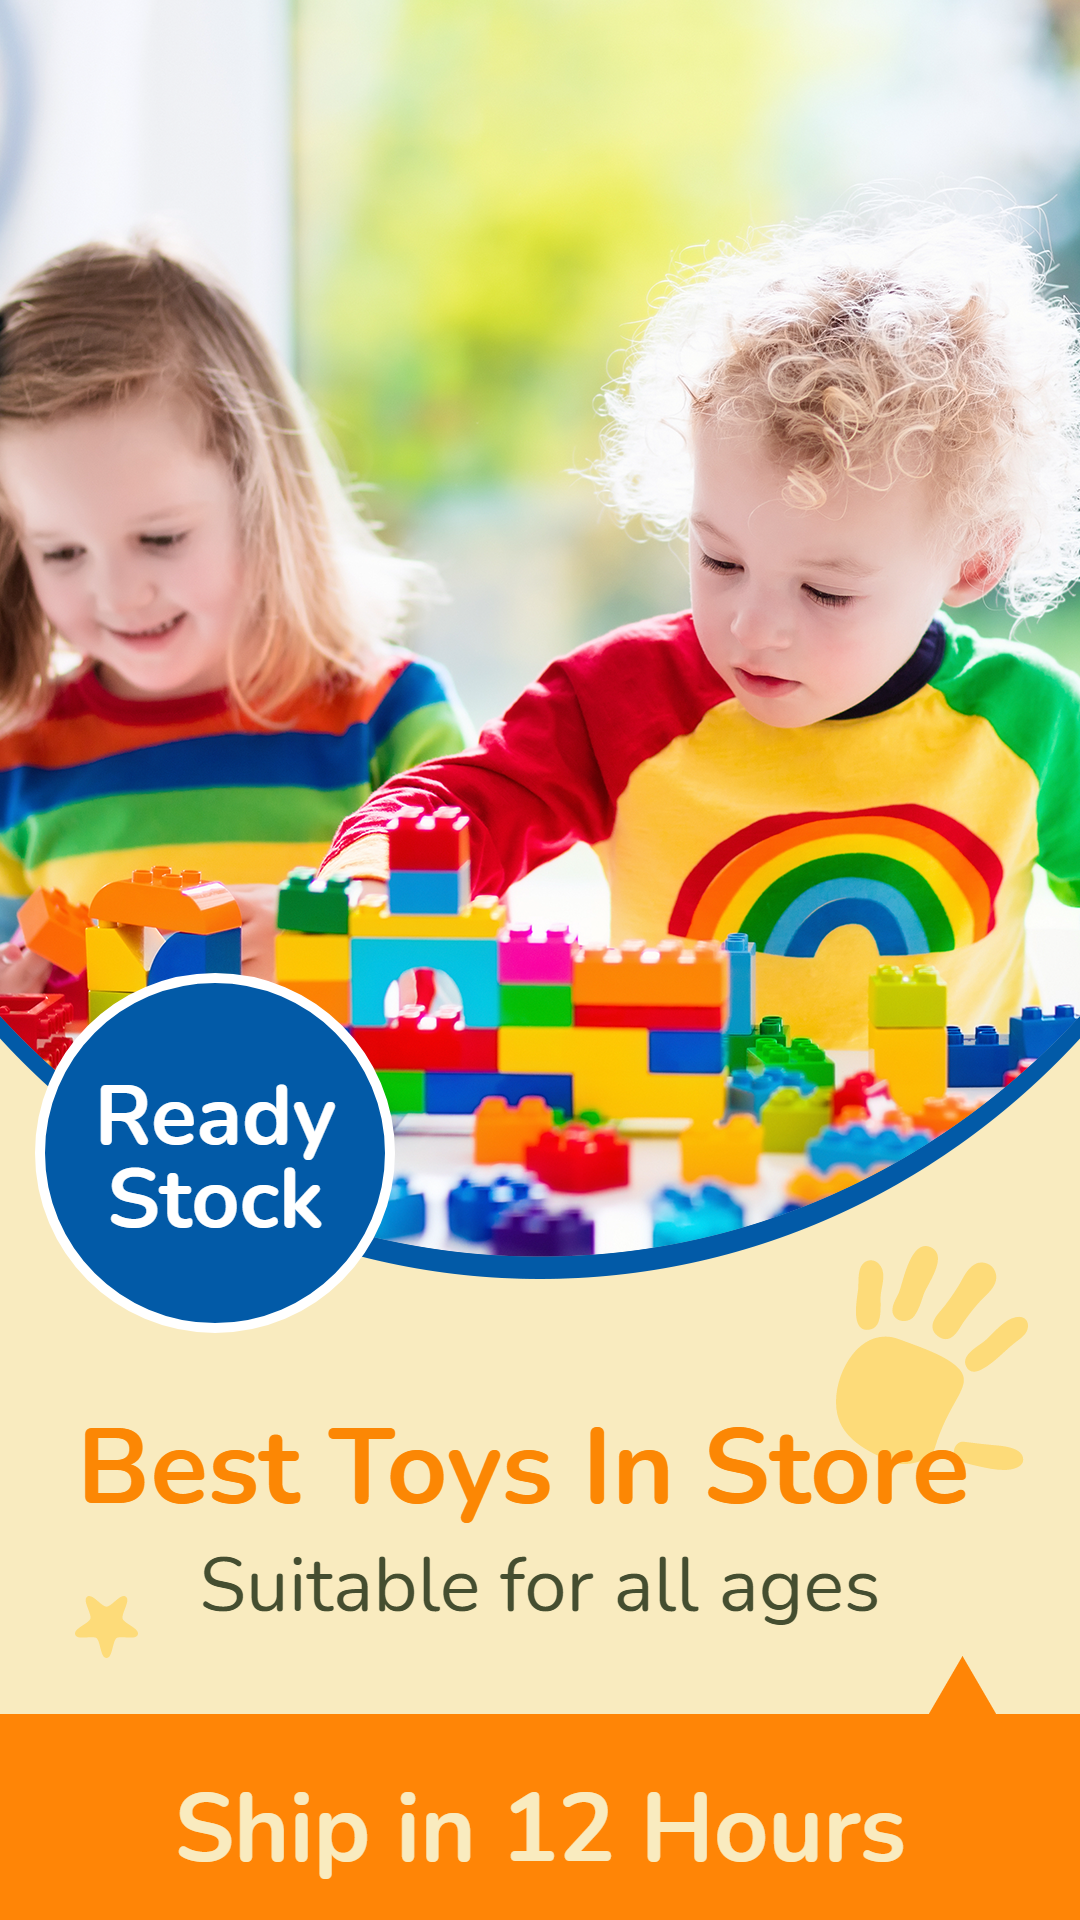 Children's Toys Promo Fast Shipping Ecommerce Story